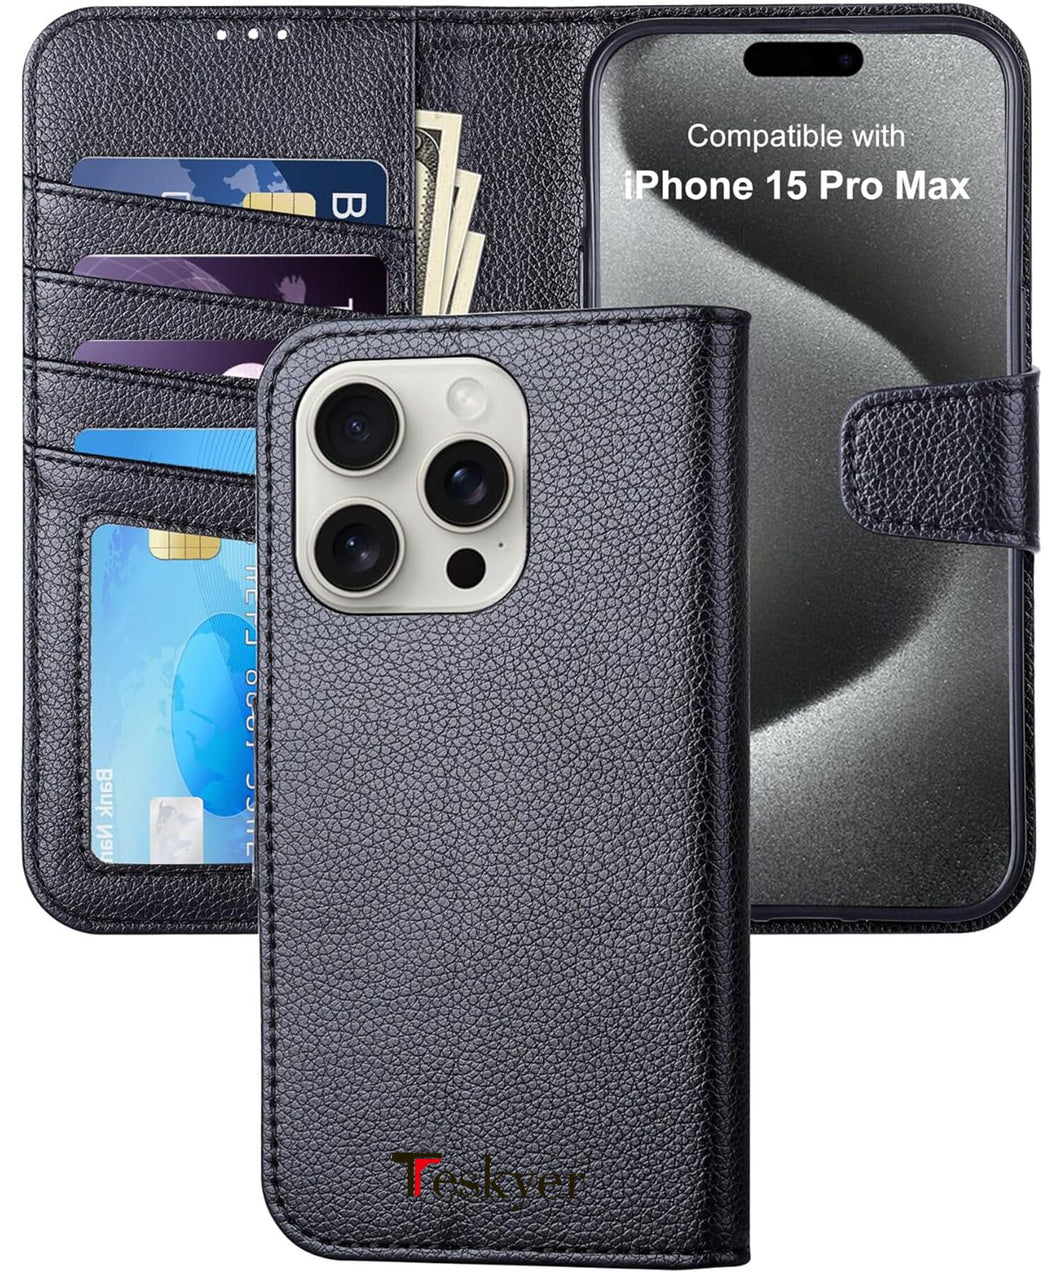 Teskyer for iPhone 15 Pro Max 6.7’’ Wallet Case, PU Leather Flip Folio Case, RFID Blocking Card Holder Kickstand, Shockproof Phone Cover Double Magnetic Clasp